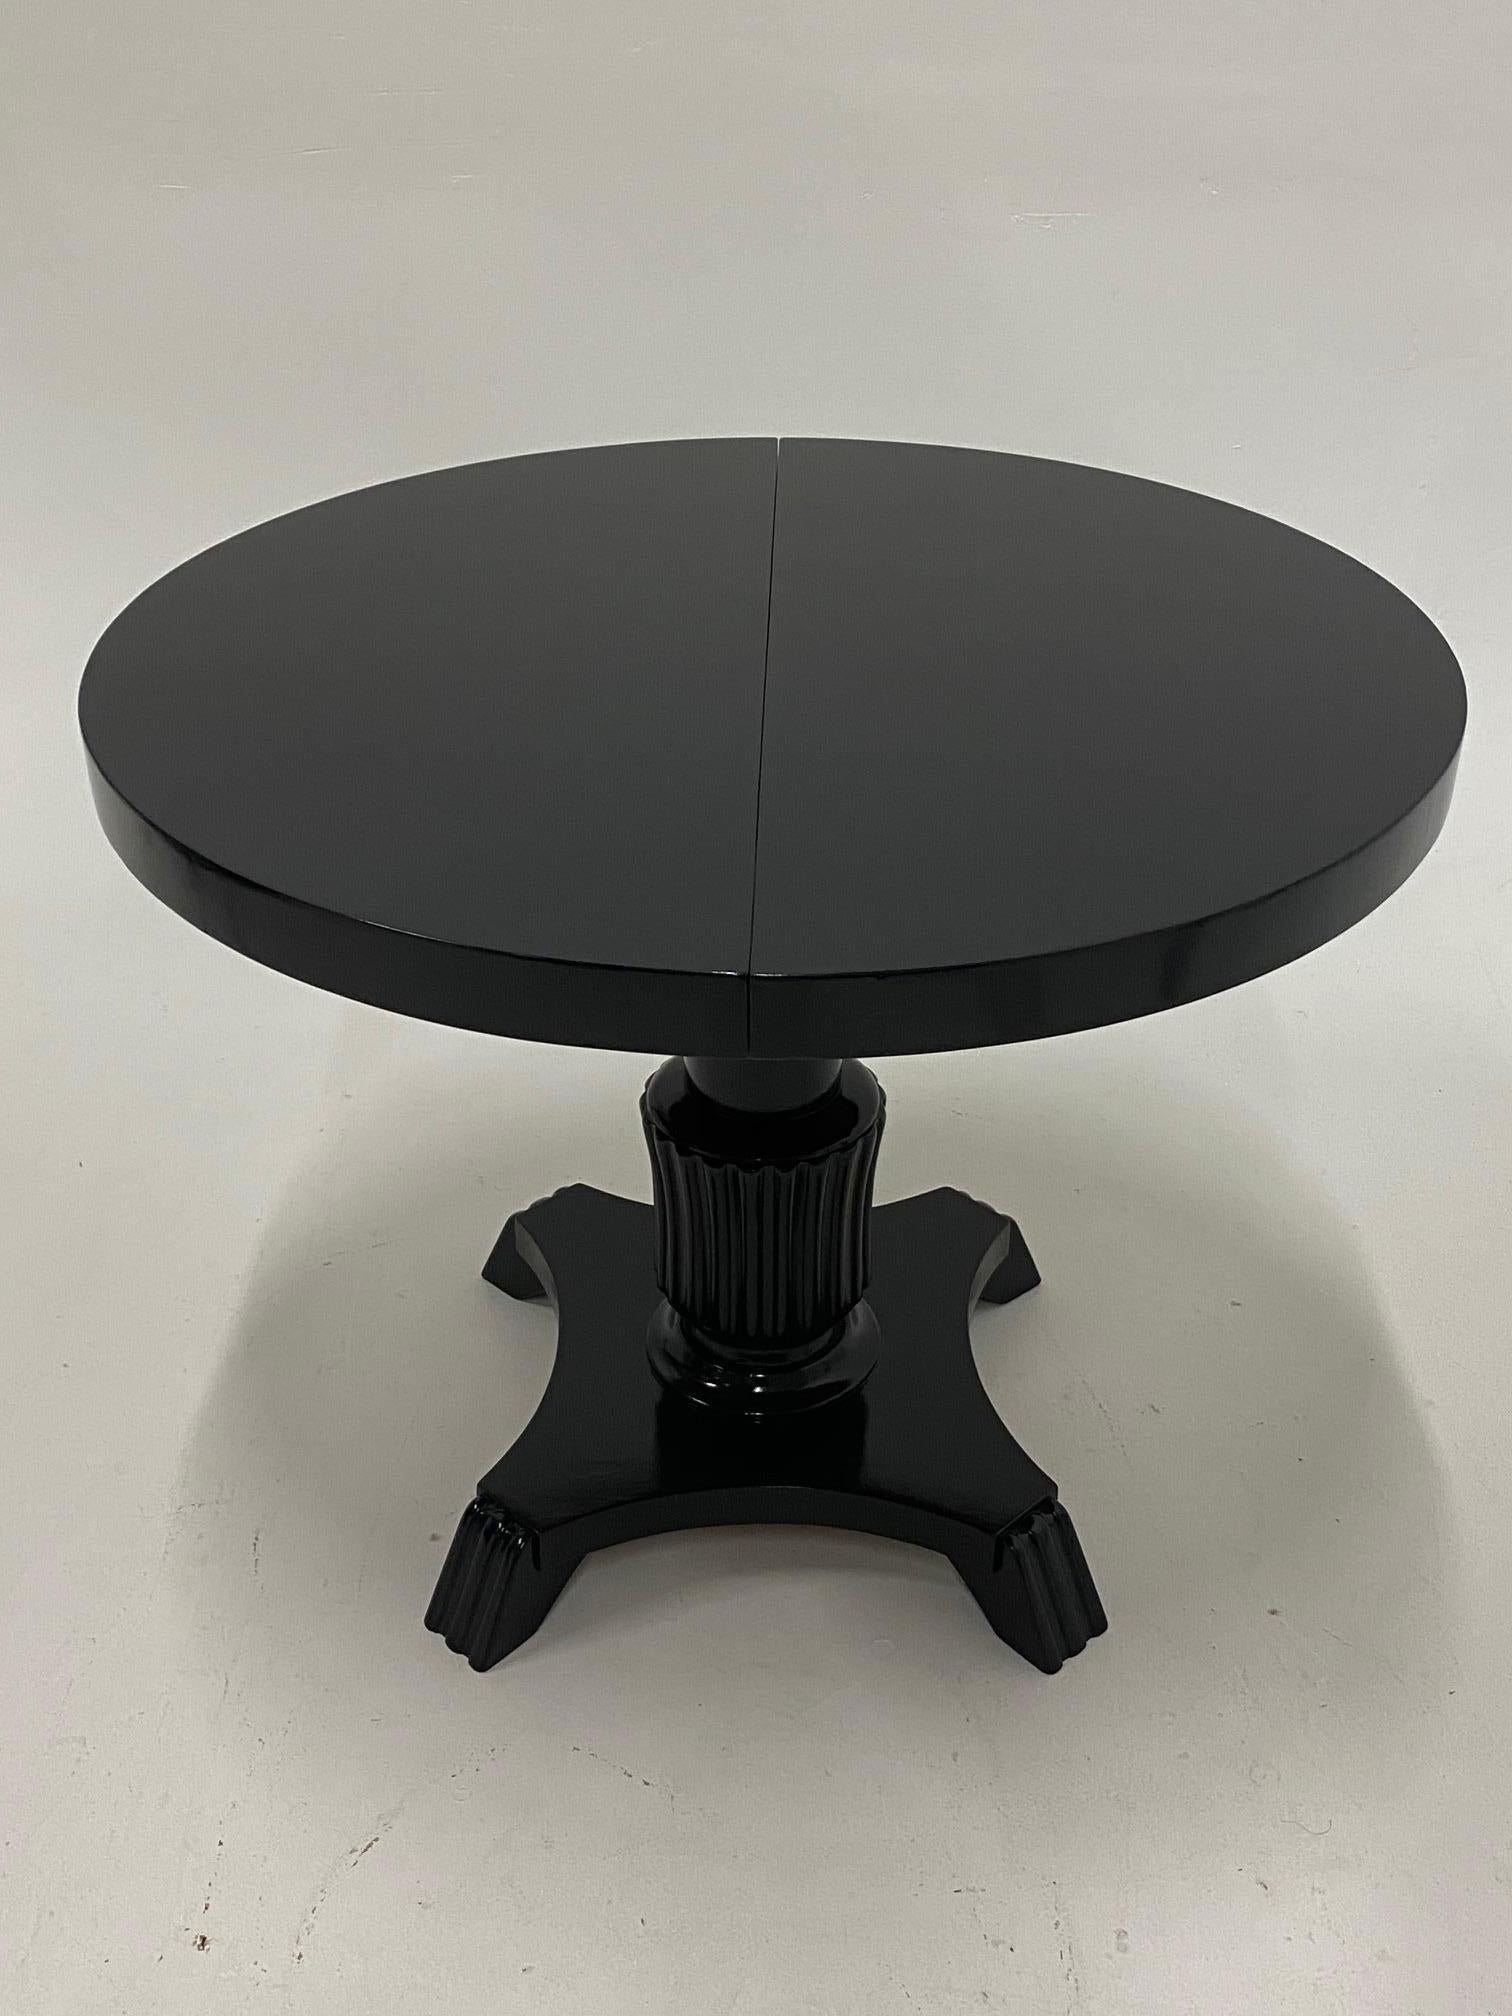 Chic very versatile dining table that is 35.5 diameter round when closed and has one leaf so when open the shape becomes oblong. Dimensions below. Table has a mechanism underneath to adjust height from 24